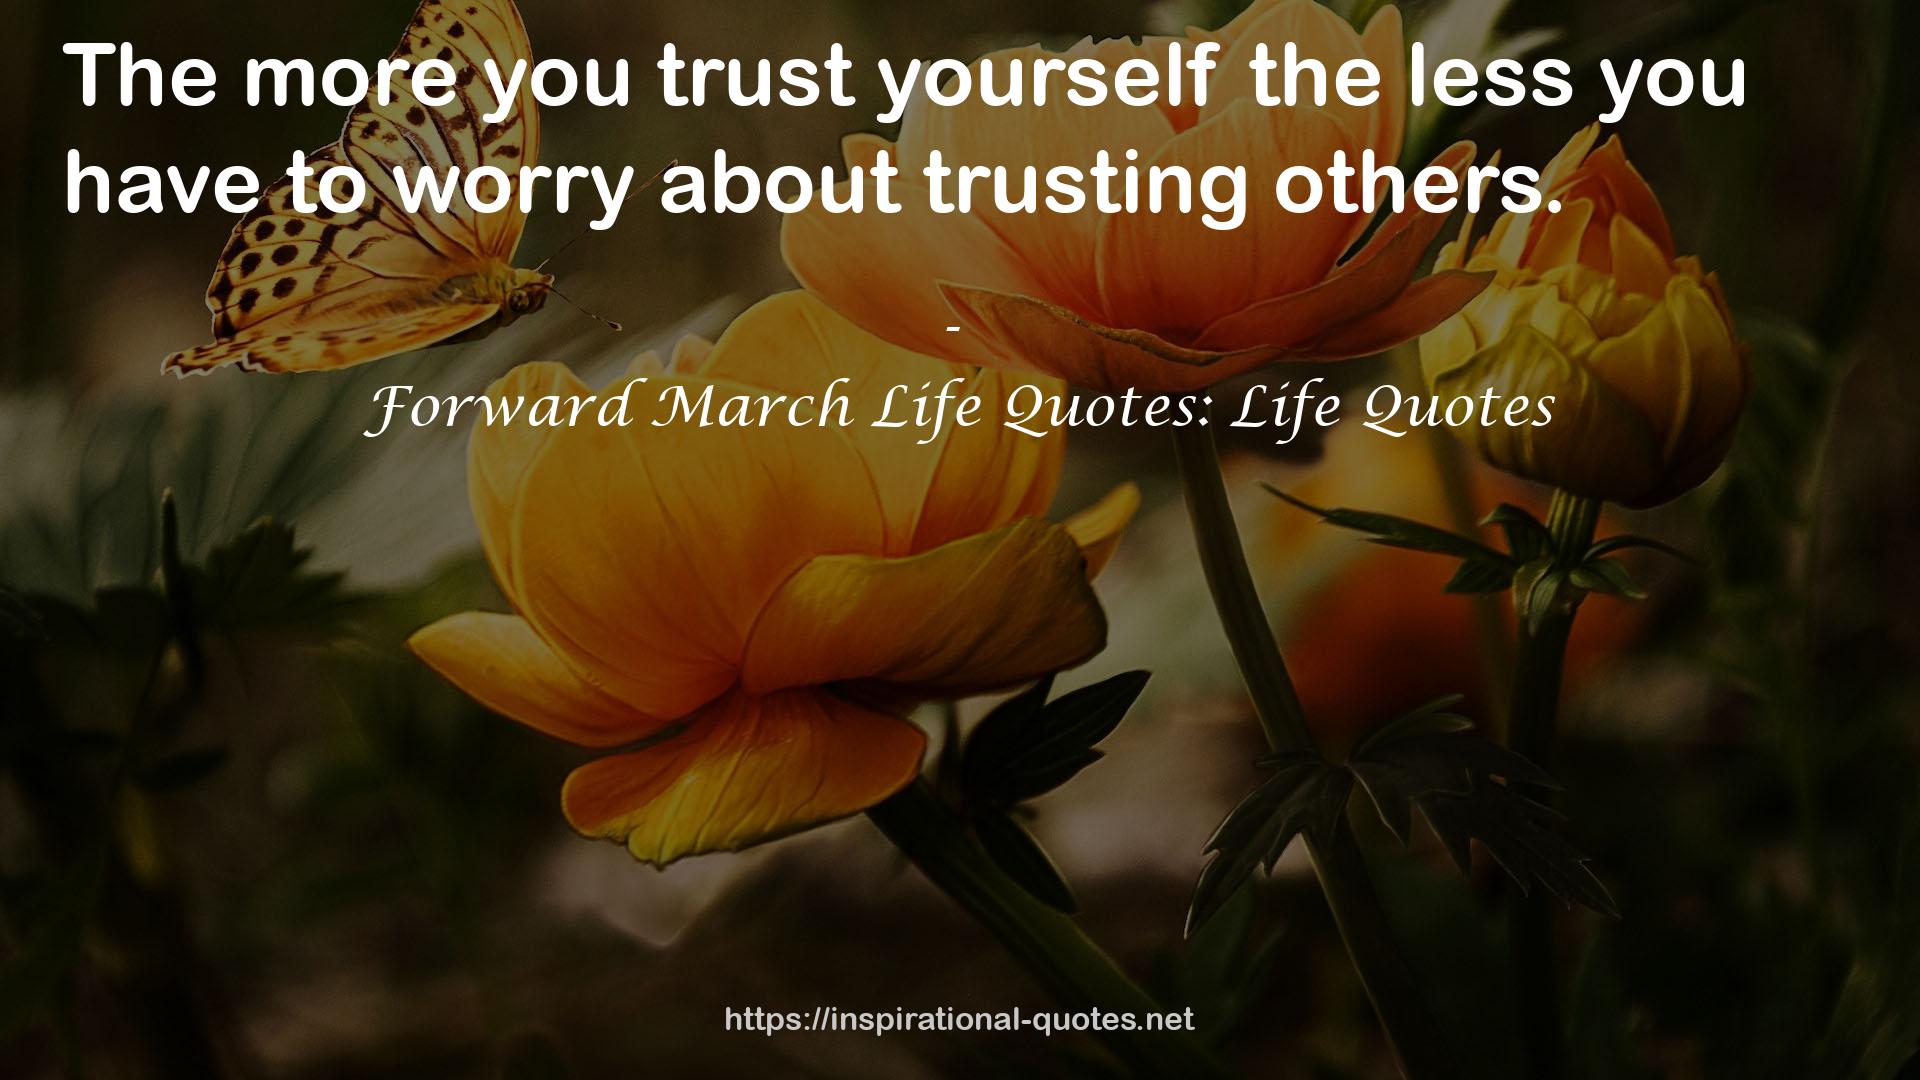 Forward March Life Quotes: Life Quotes QUOTES